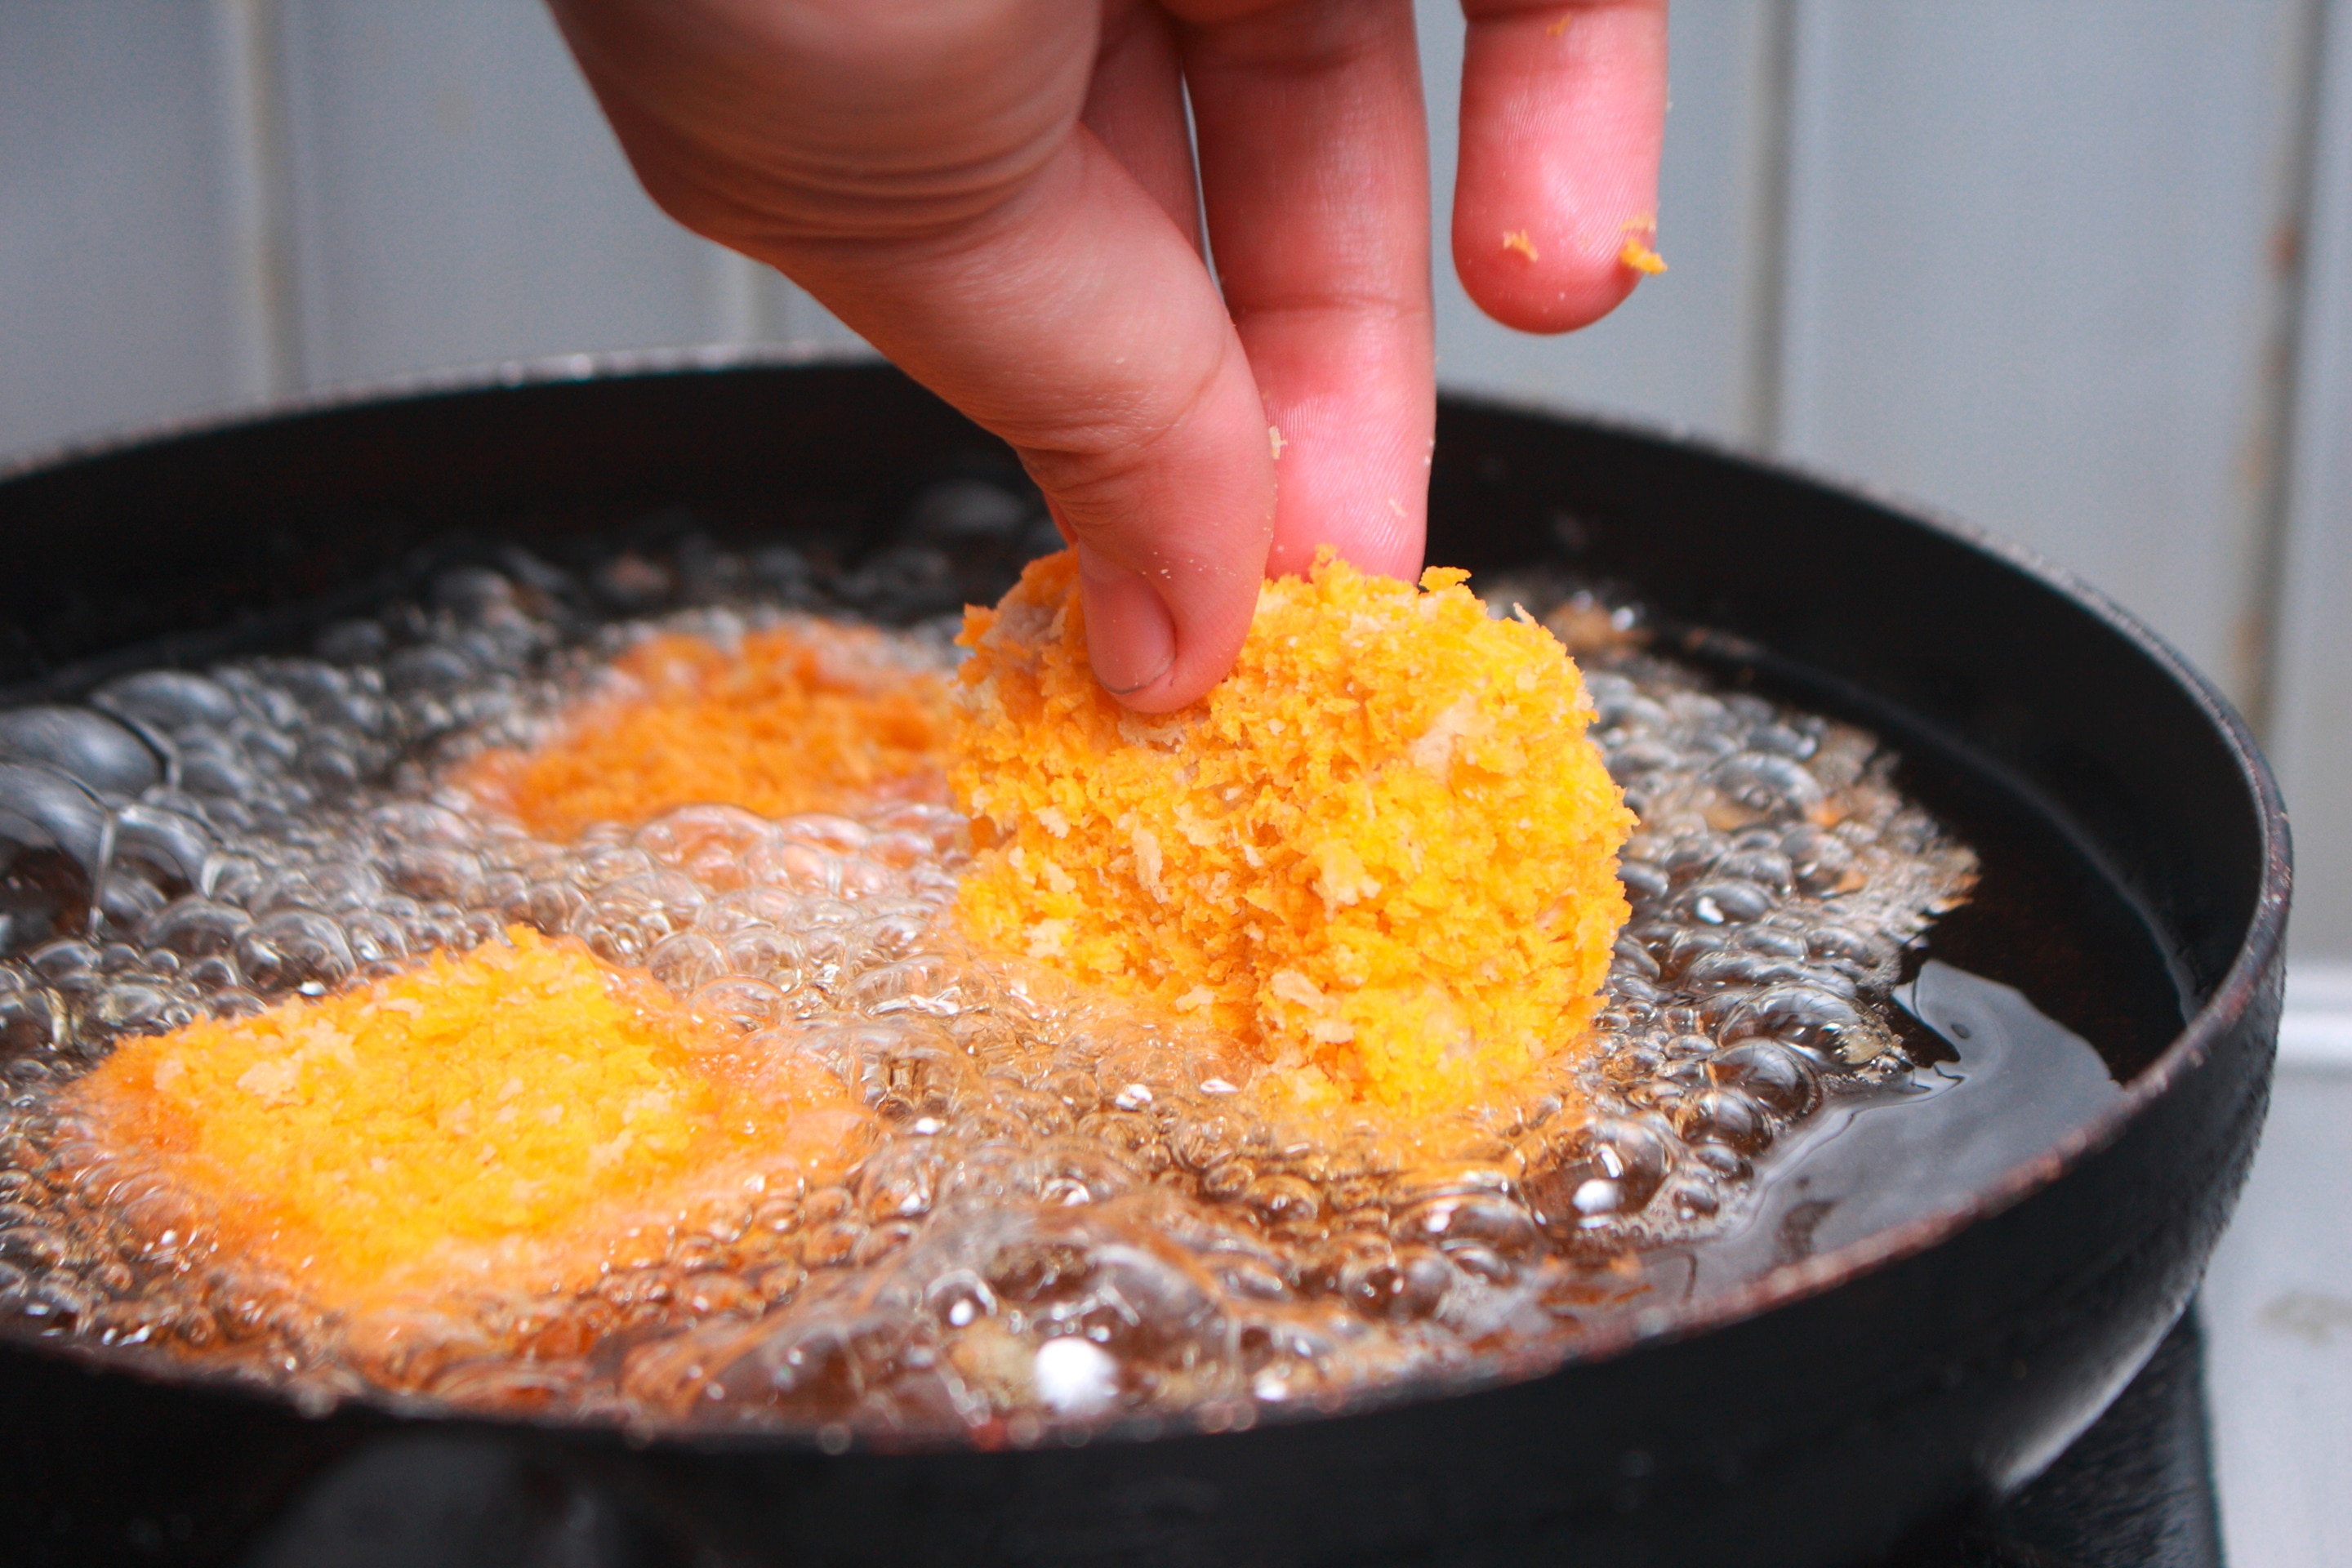 Chicken nugget being dropped into hot oil